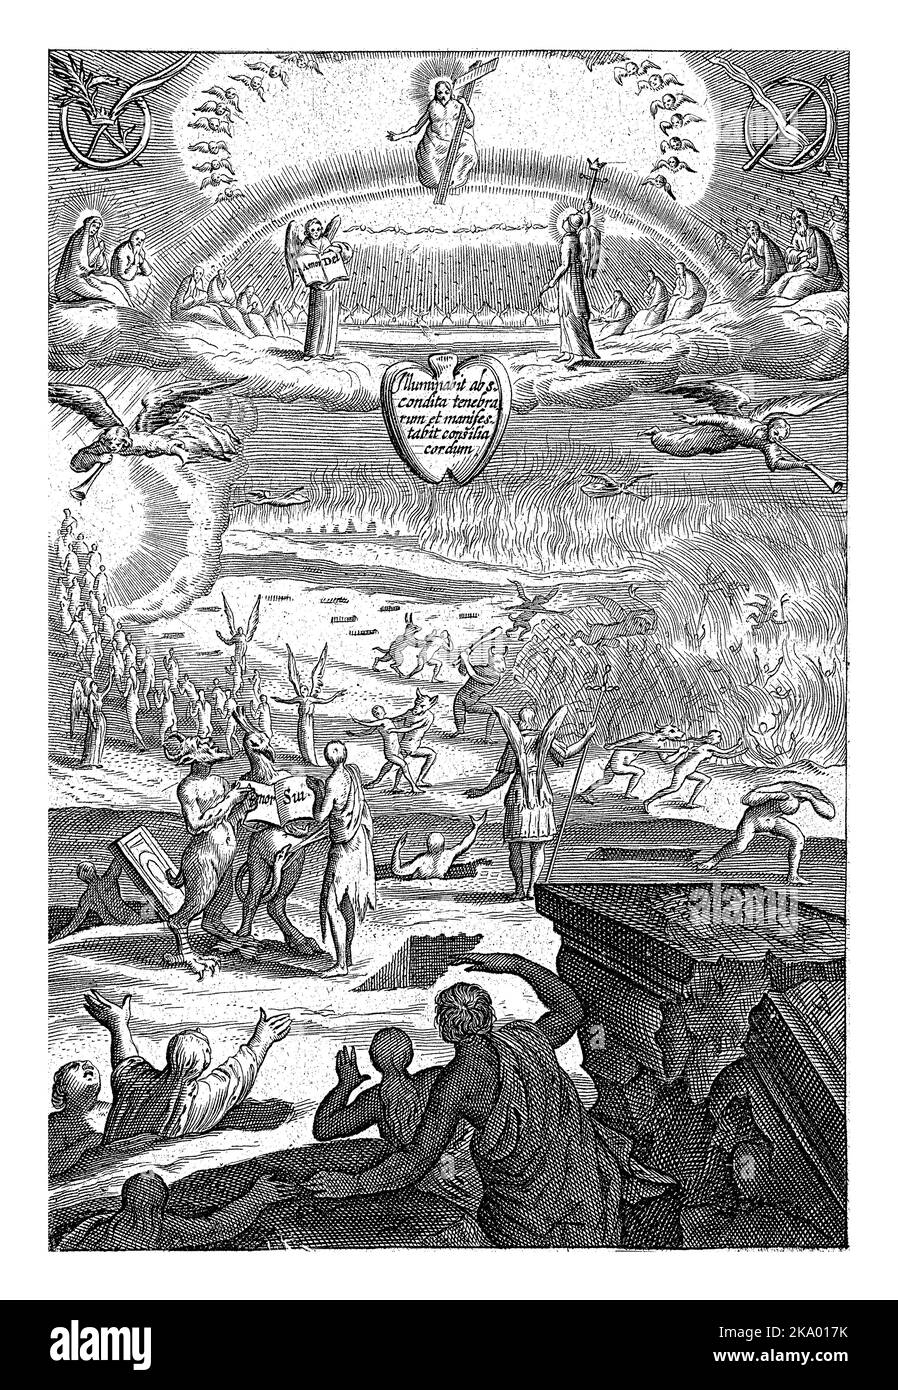 At the last judgment souls of the godly and wicked are sent to heaven or hell. Stock Photo